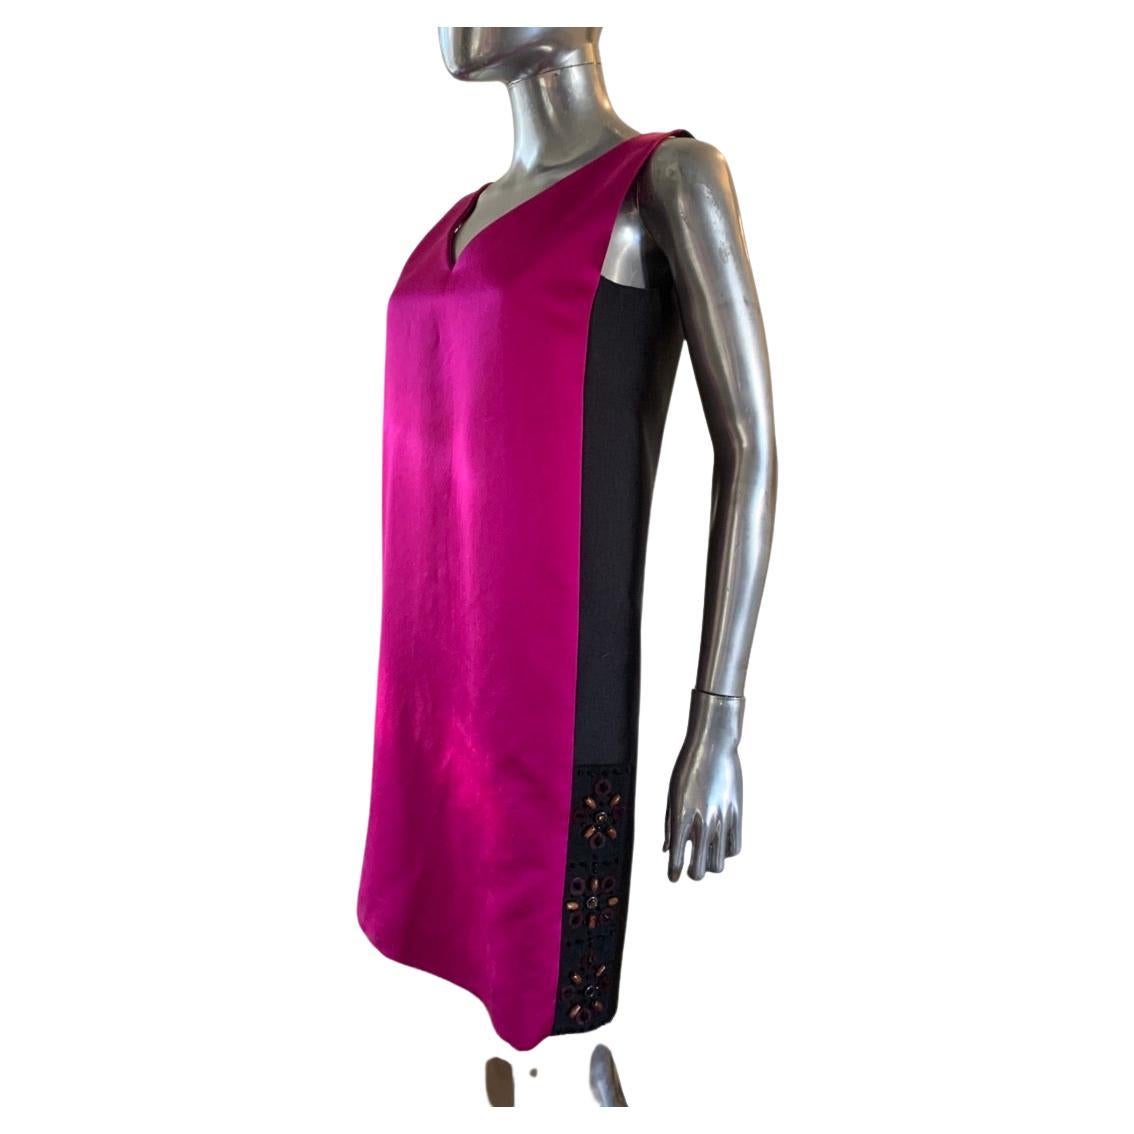 This Lanvin dress is so modern and chic! A shocking pink silk front and black silk back with very modern beading on both sides of the hem. NWT, this dress was designed by Alber Elbaz for the Summer 2013 Runway collection. Purchased at Barney’s NYC.